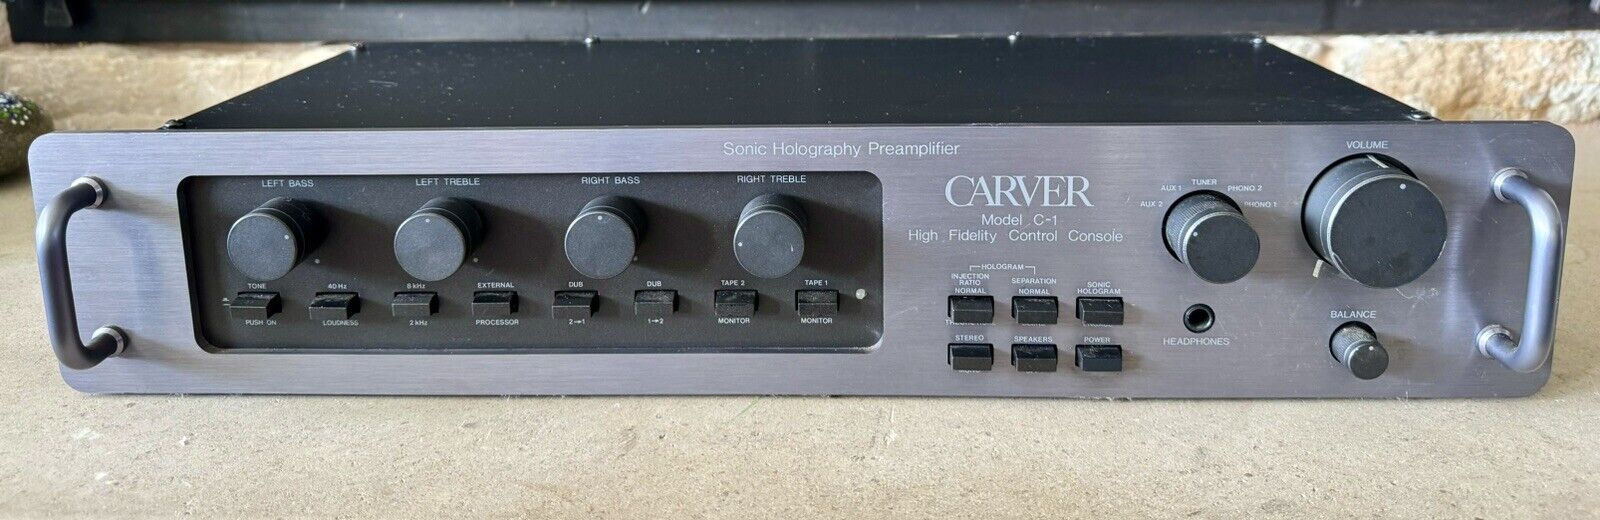 Carver Model C-1 Sonic Holography Preamplifier - AWESOME  - used